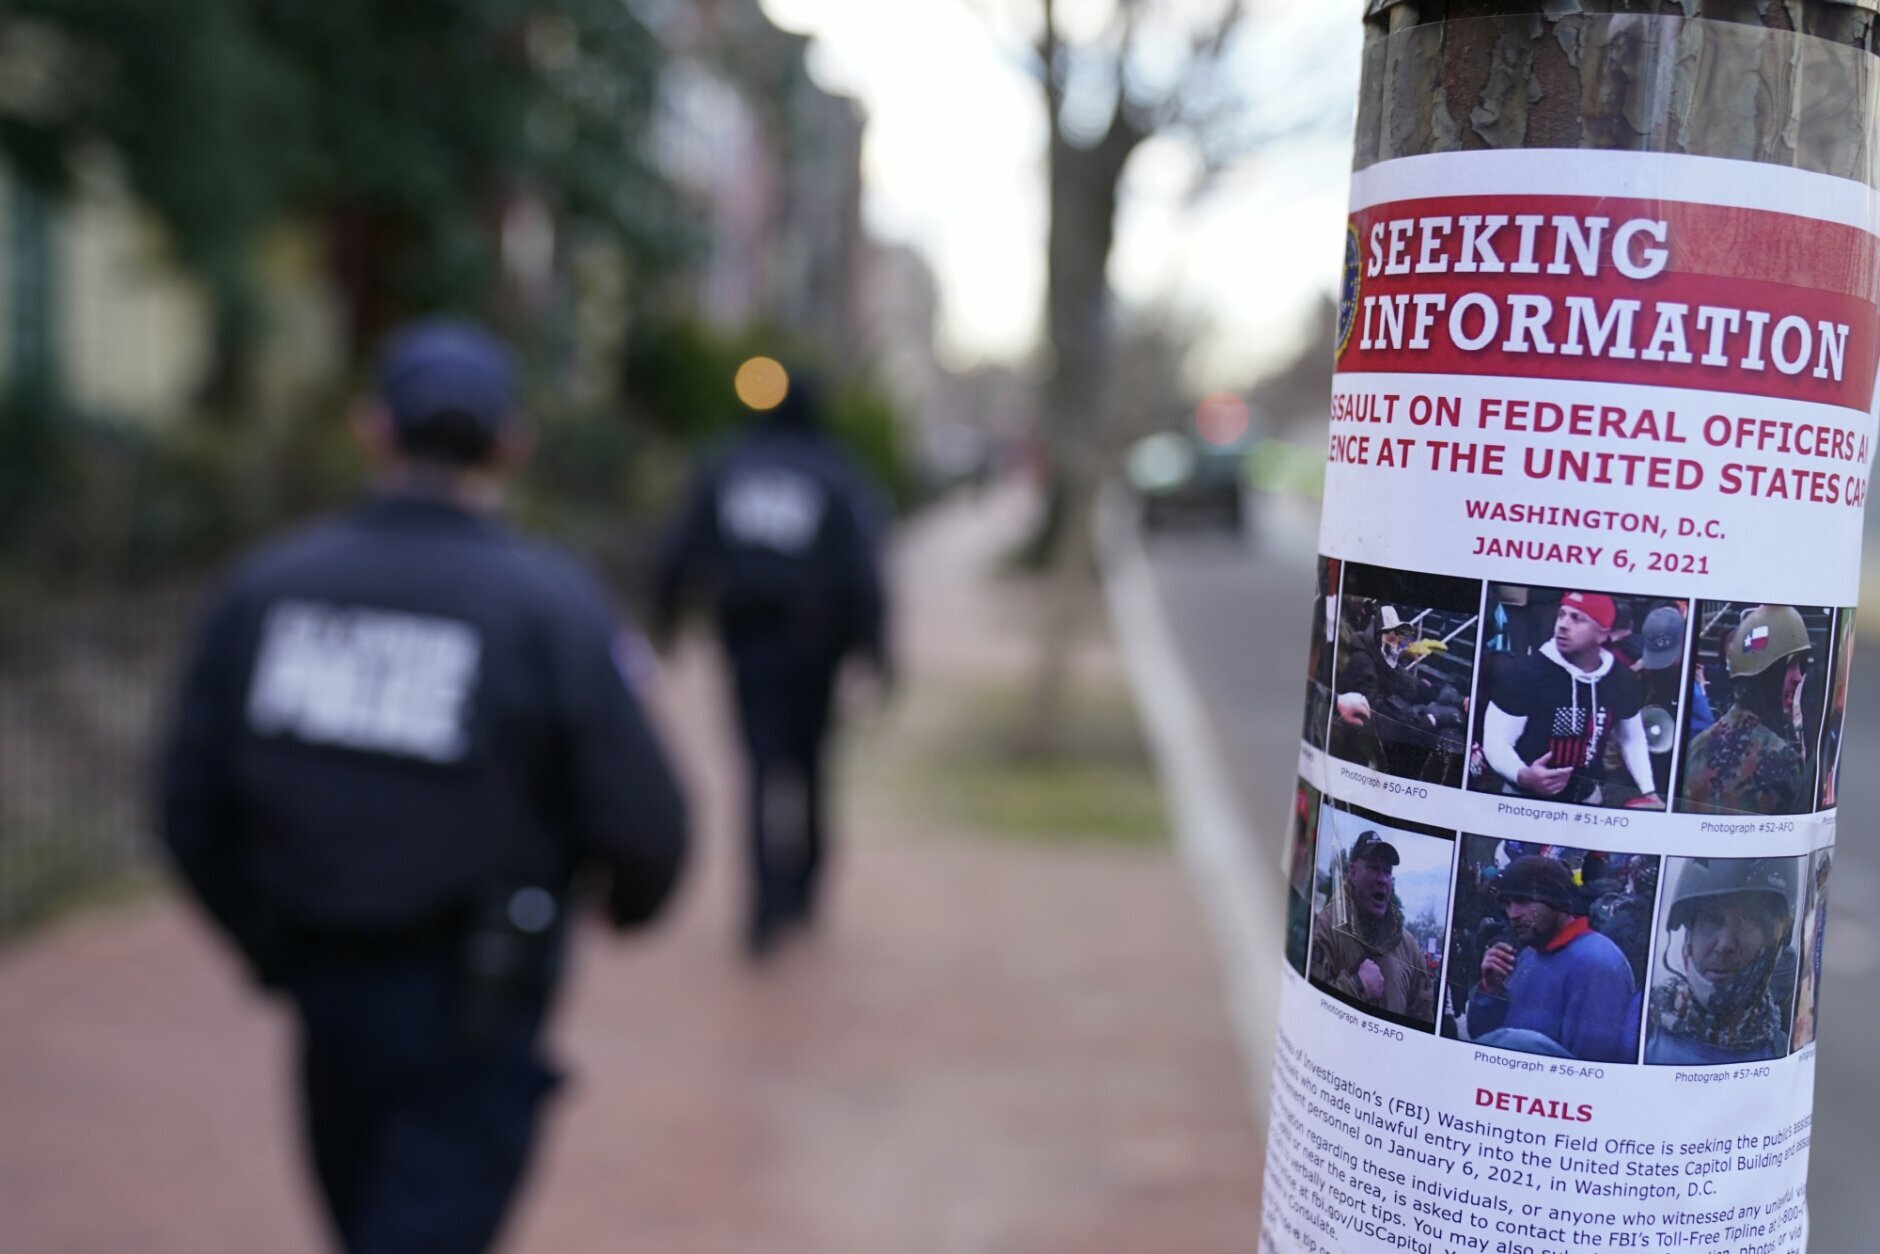 Capitol police walk past a poster seeking information on individuals who attacked the Capitol building, Tuesday, Jan. 19, 2021, in Washington. Security n been heightened ahead of President-elect Joe Biden's inauguration ceremony. (AP Photo/David Goldman)